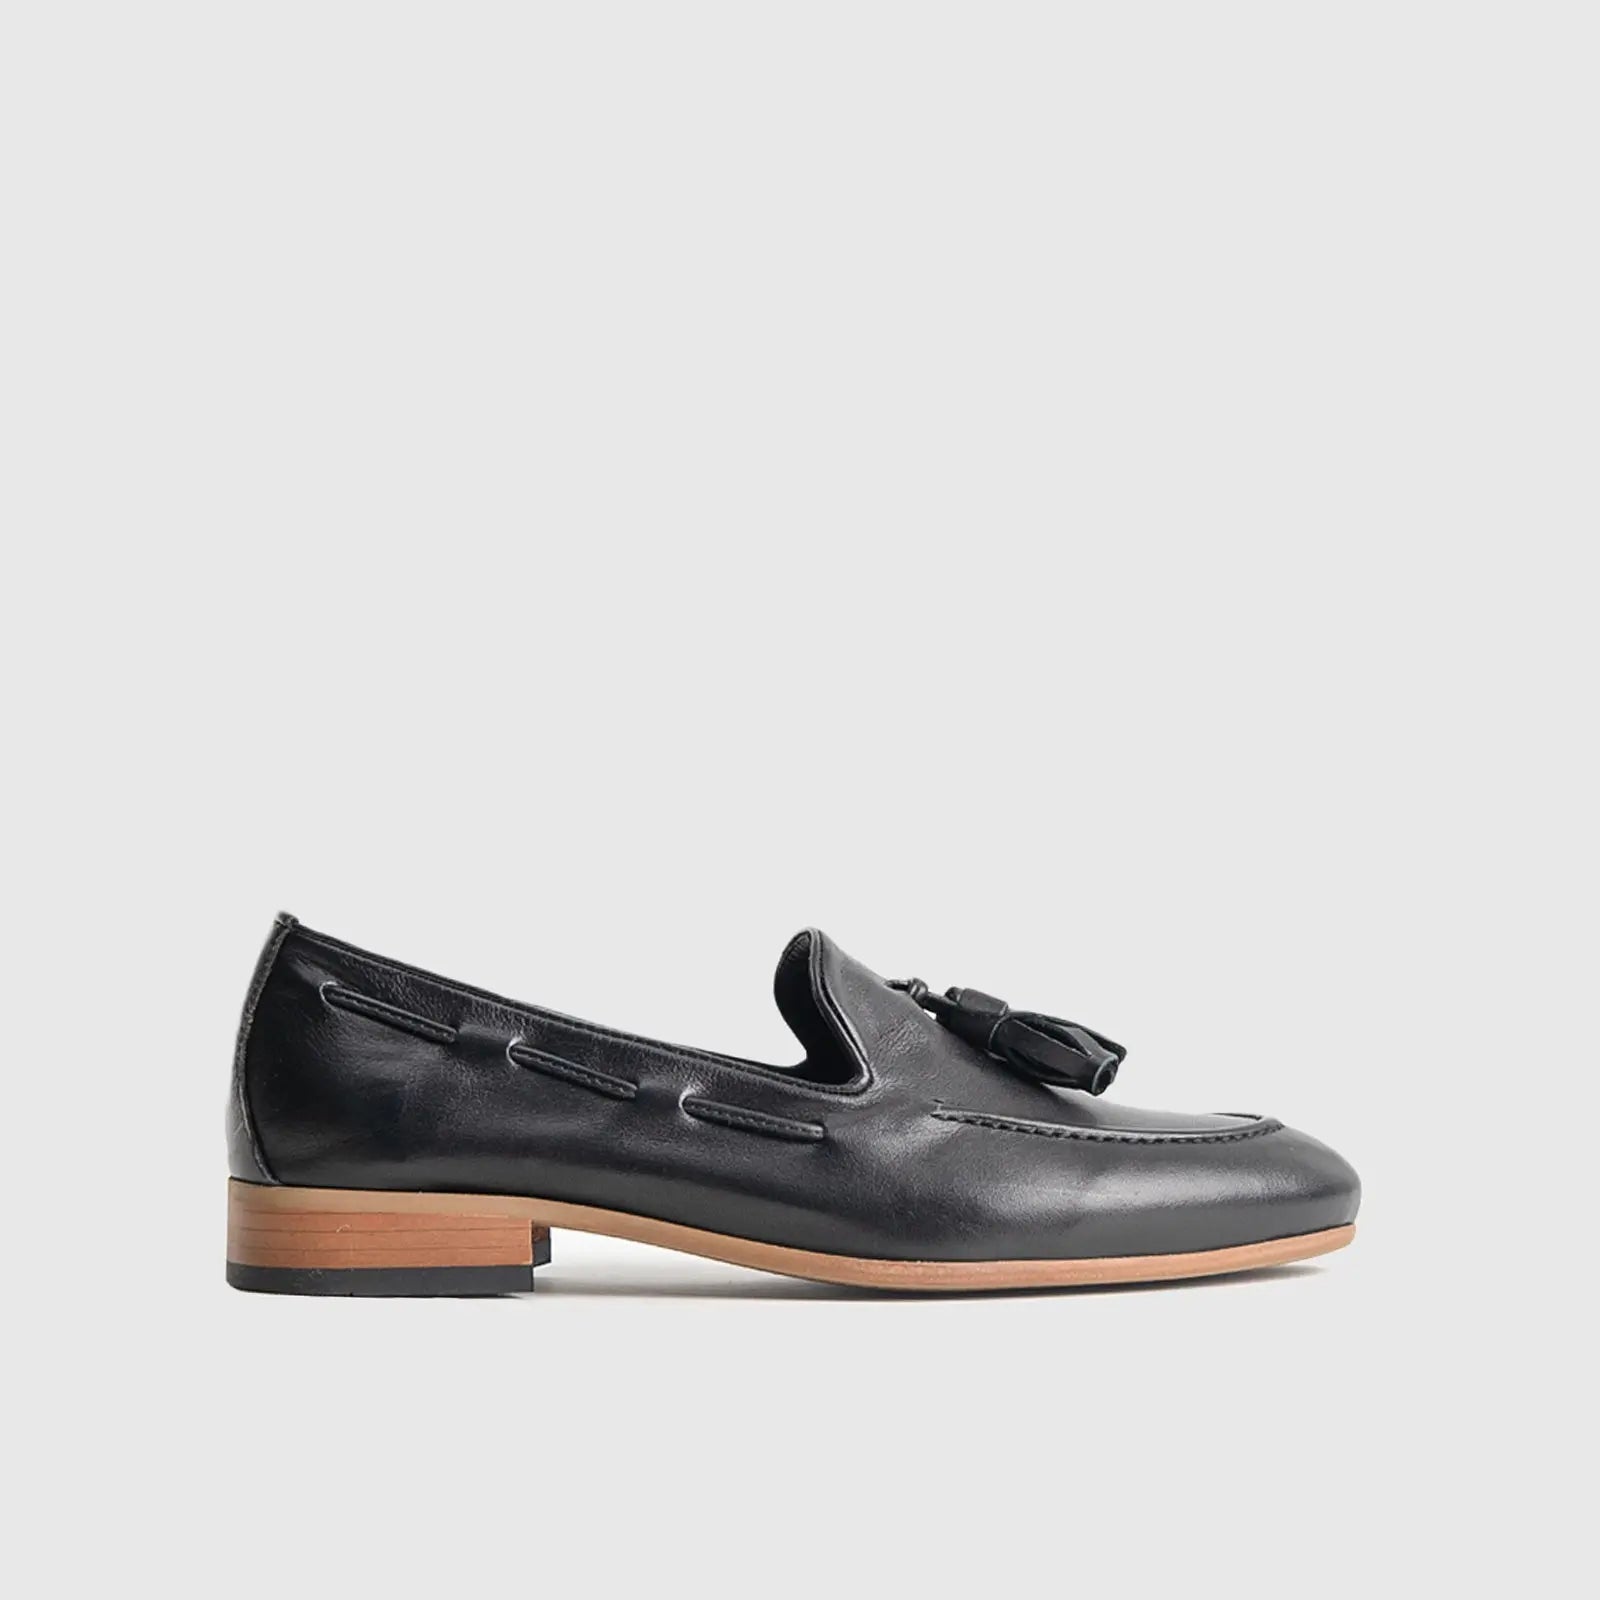 Bulletti Casual Slip On Loafers - 002 Black Loafers | familyshoecentre